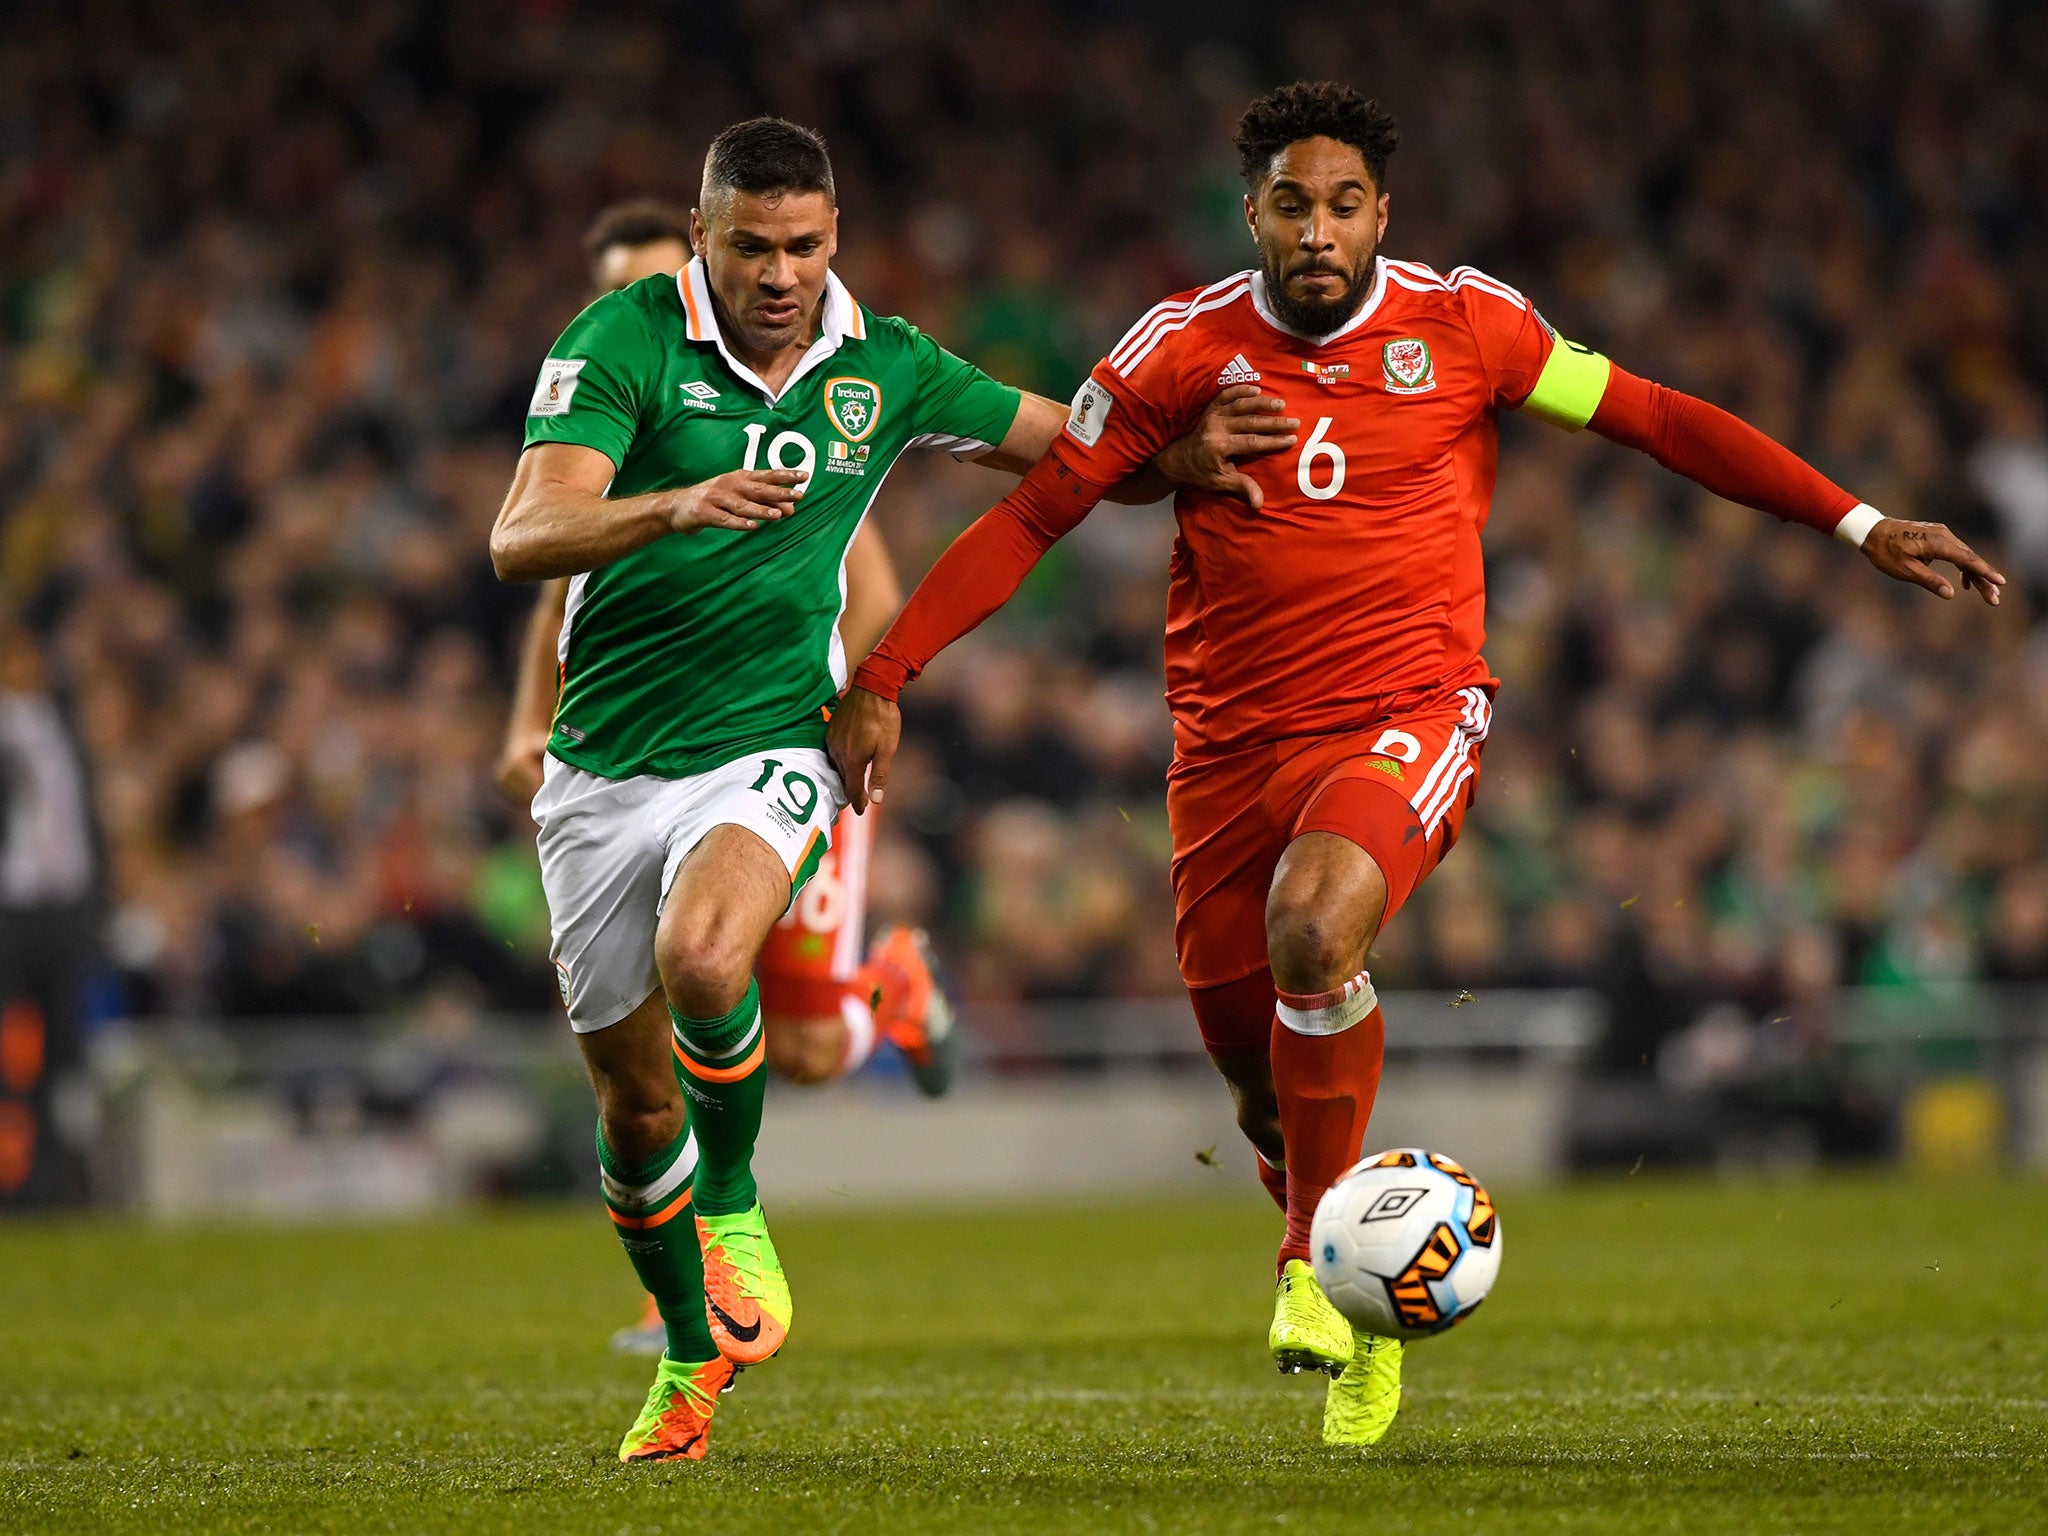 &#13;
Wales' World Cup hopes were dashed by the Republic of Ireland &#13;